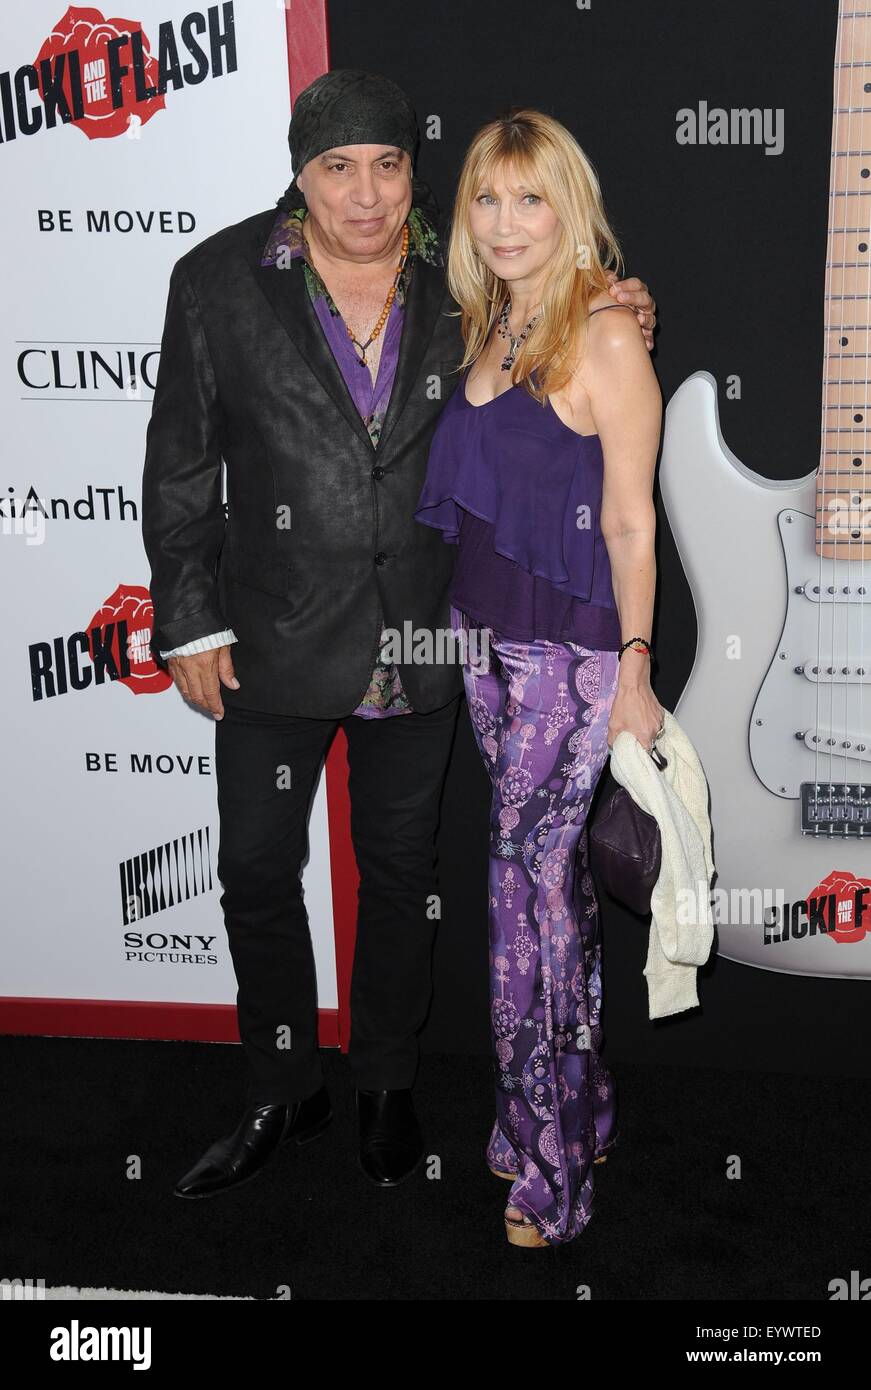 Steven Van Zandt, Maureen Van Zandt at arrivals for RICKI AND THE FLASH Premiere, AMC Loews Lincoln Square, New York, NY August 3, 2015. Photo By: Kristin Callahan/Everett Collection Stock Photo